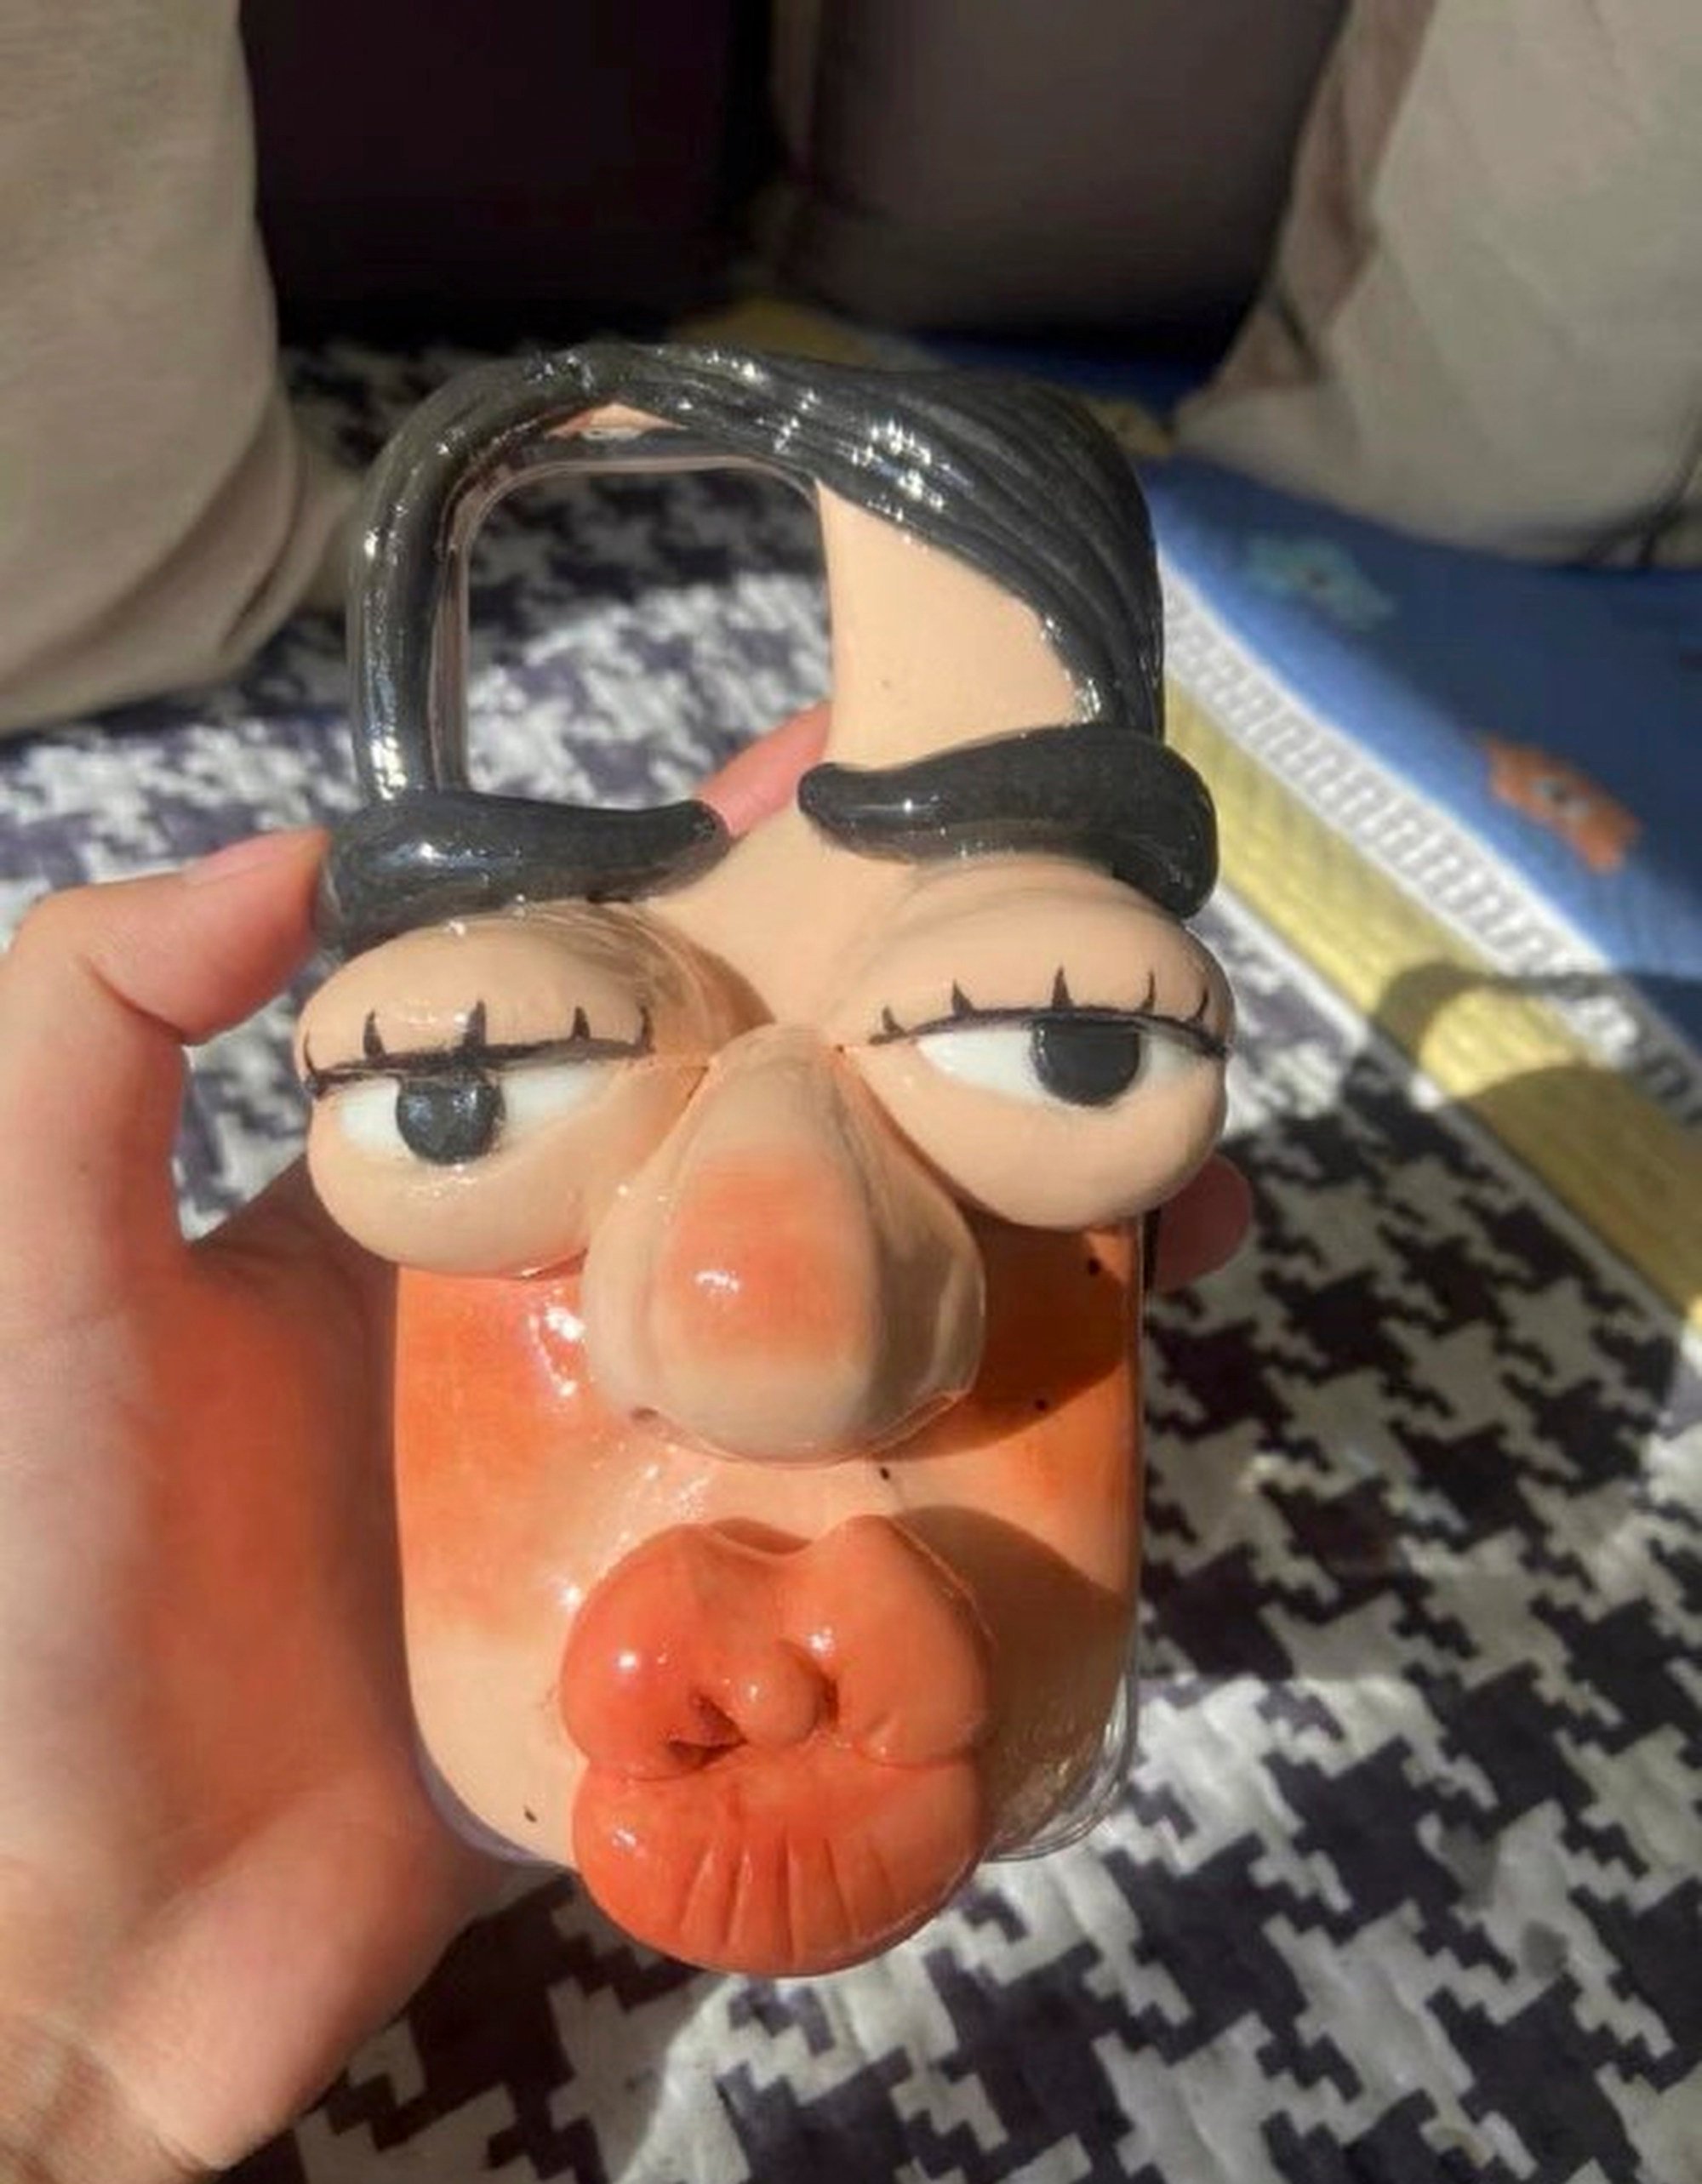 The maker of the clay human face phone cases says each one takes hours to make. Photo: Weibo